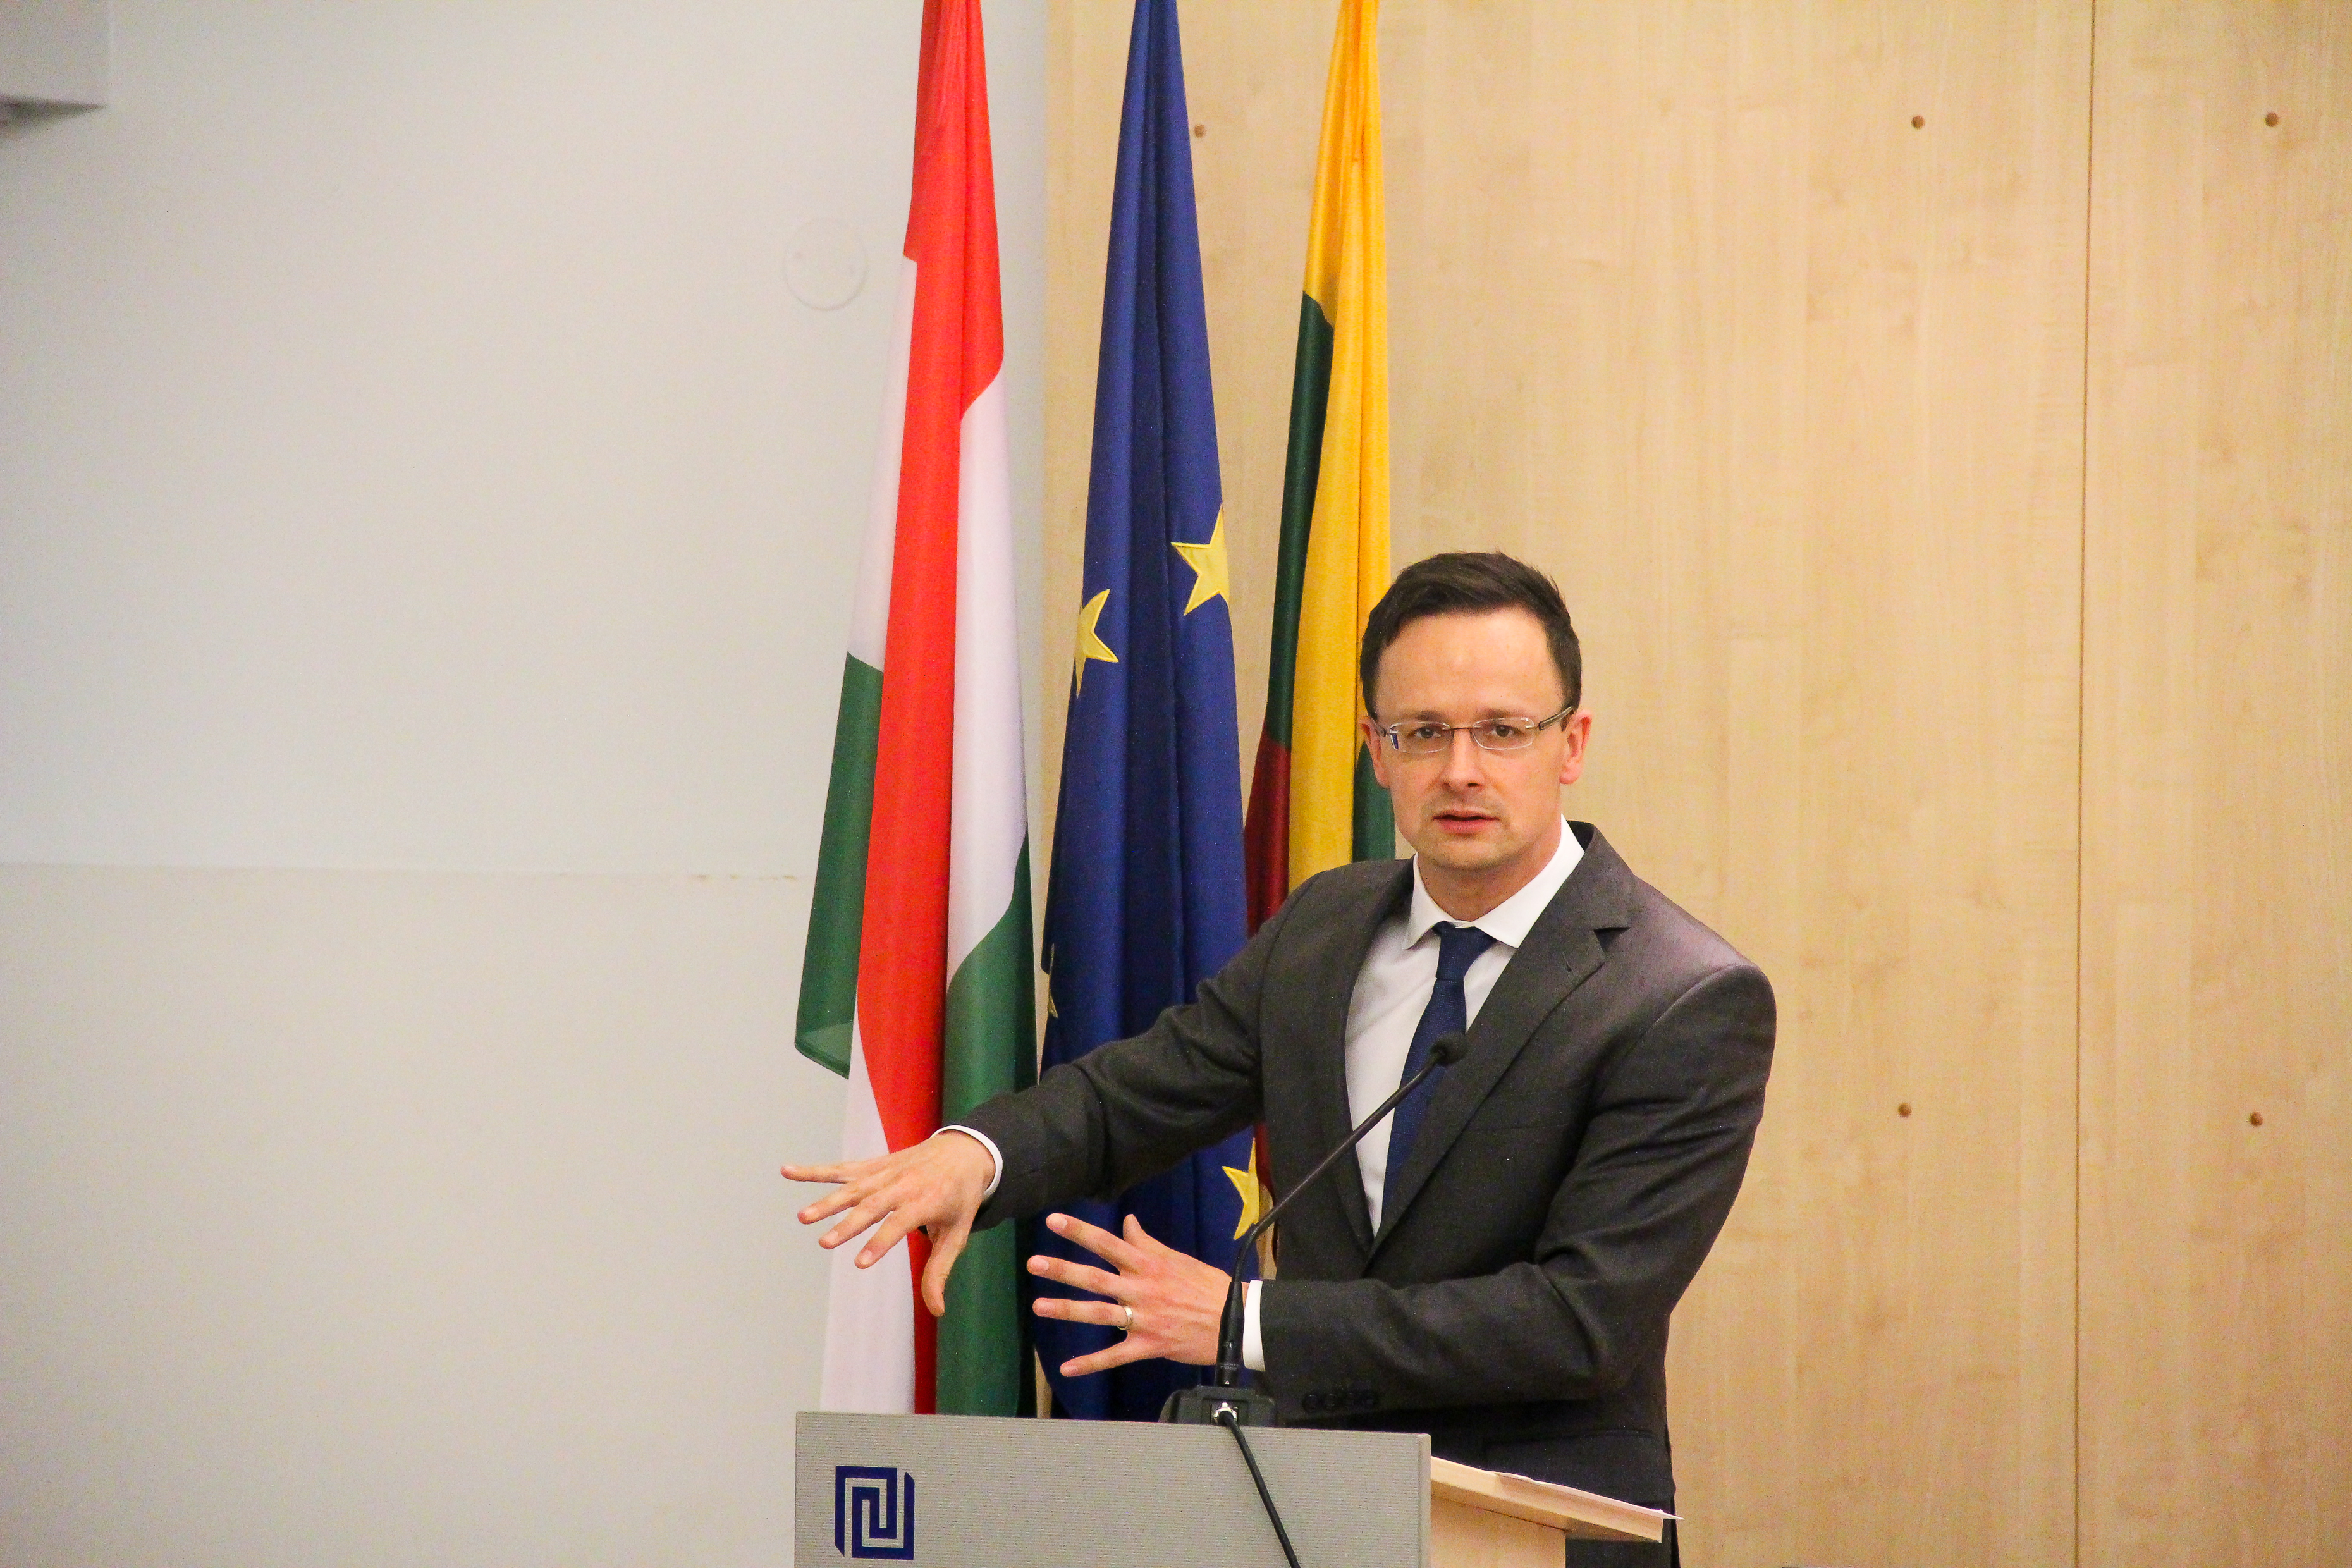 Public lecture by Hungarian minister for foreign affairs and trade Mr. Péter Szijjártó “The Visegrad Group: regional cohesion of values and interests within the framework of the European Union”